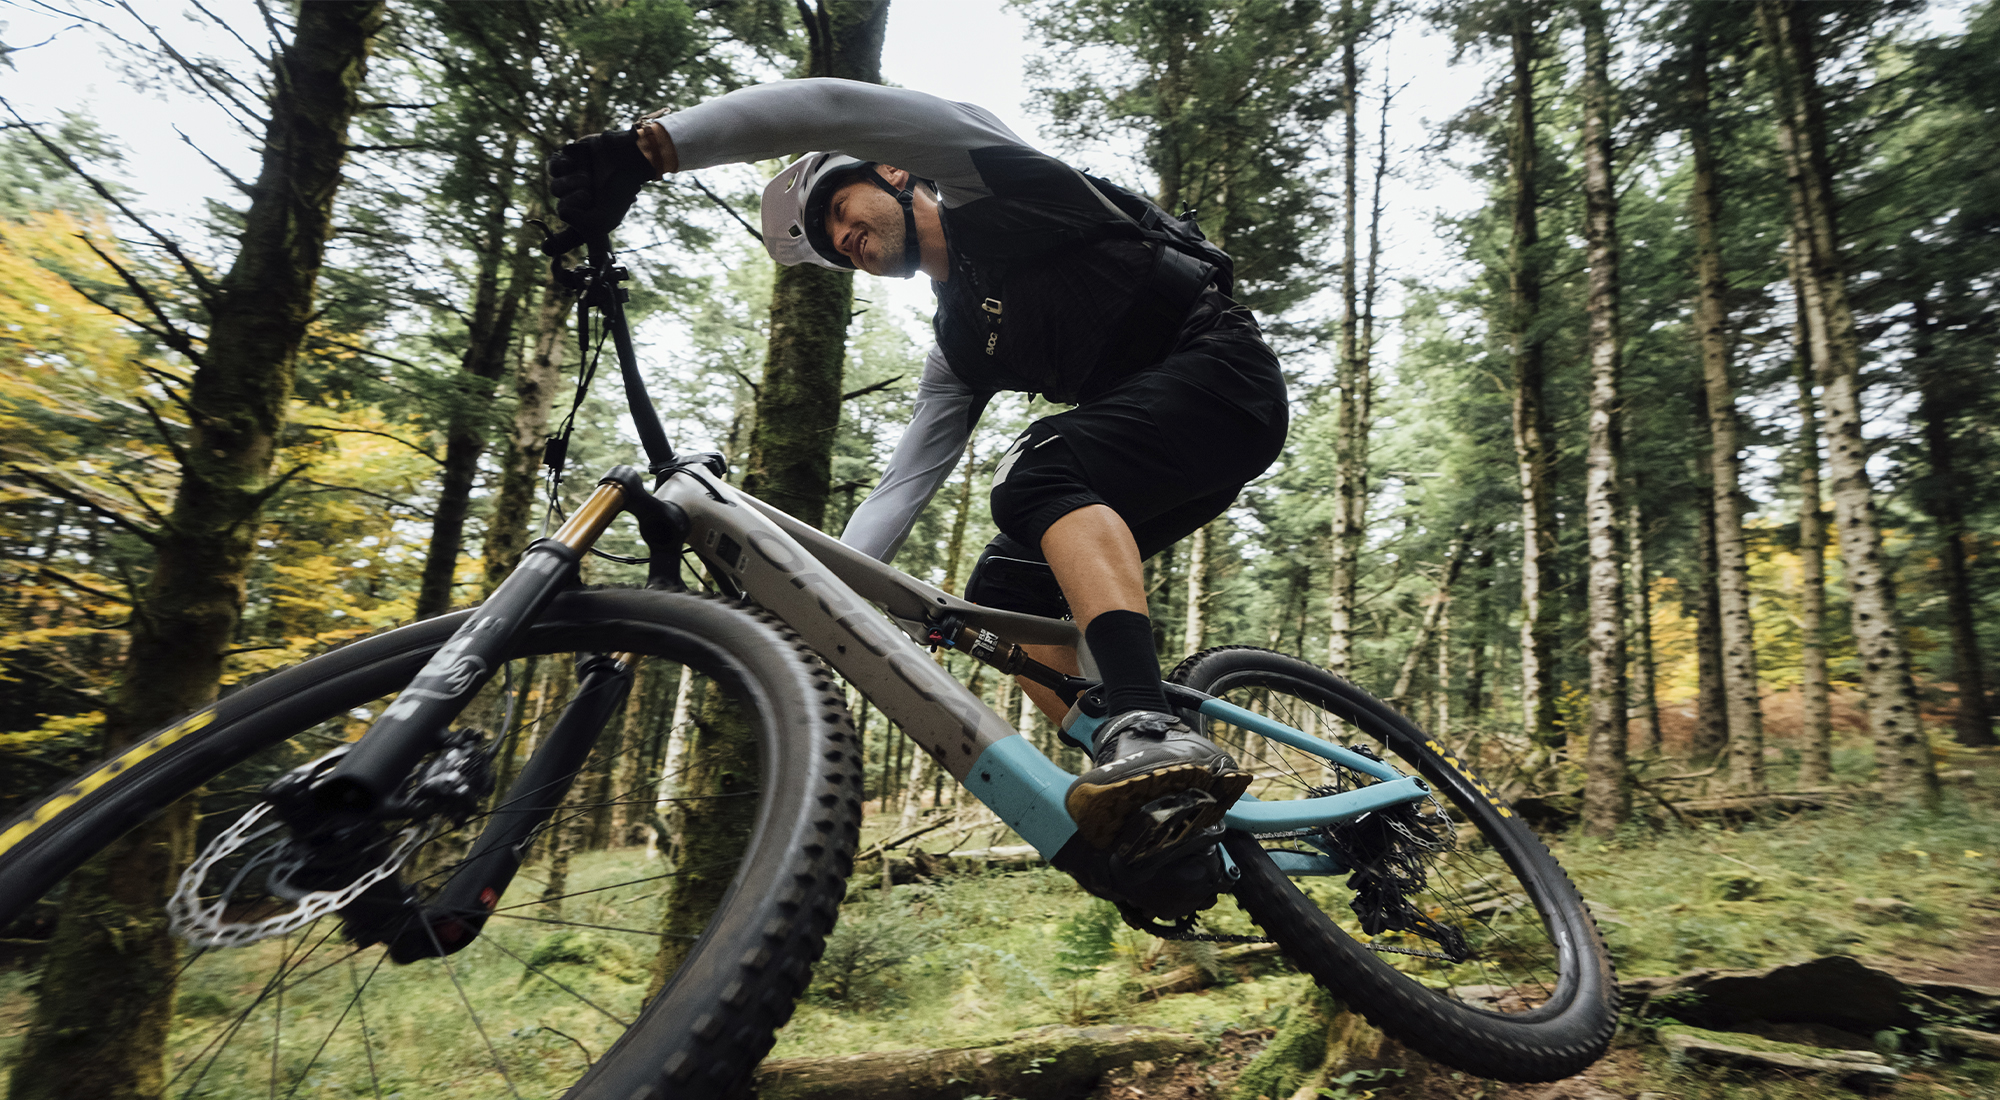 Your new Orbea is closer than you think!